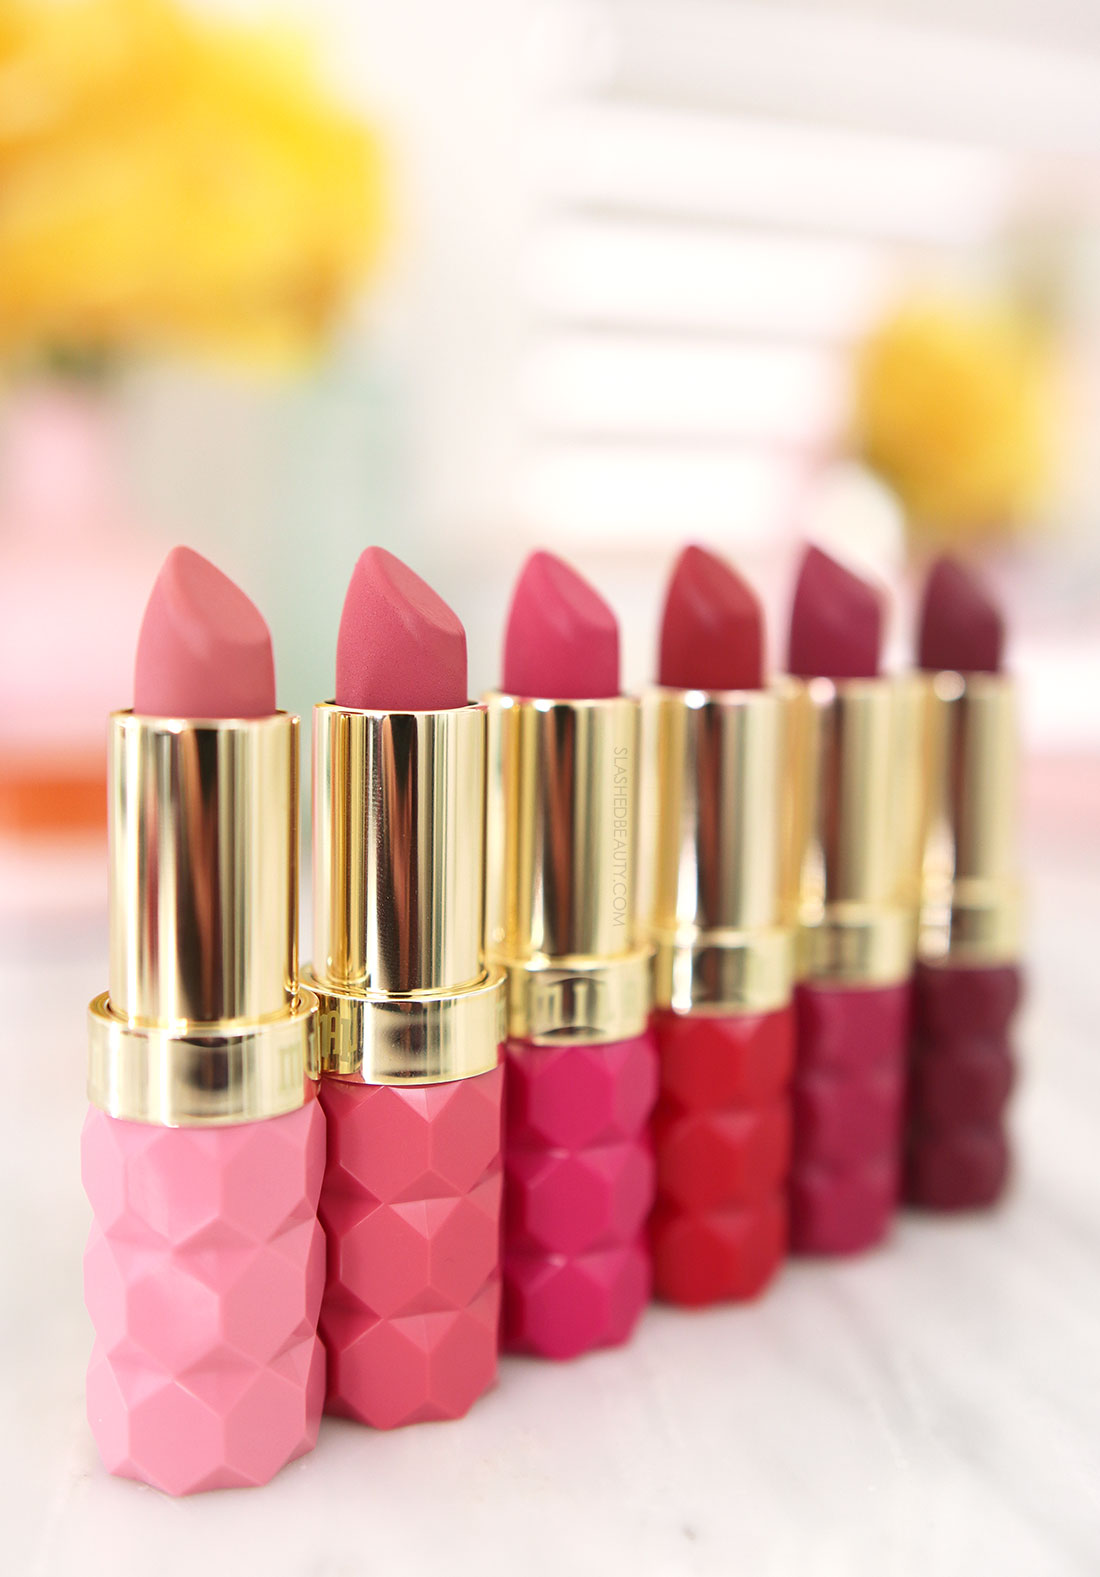 Milani Color Fetish Matte The Flora Collection Lipsticks lined up on a marble surface | Milani Color Fetish Matte Flora Collection Review & Swatches | Slashed Beauty